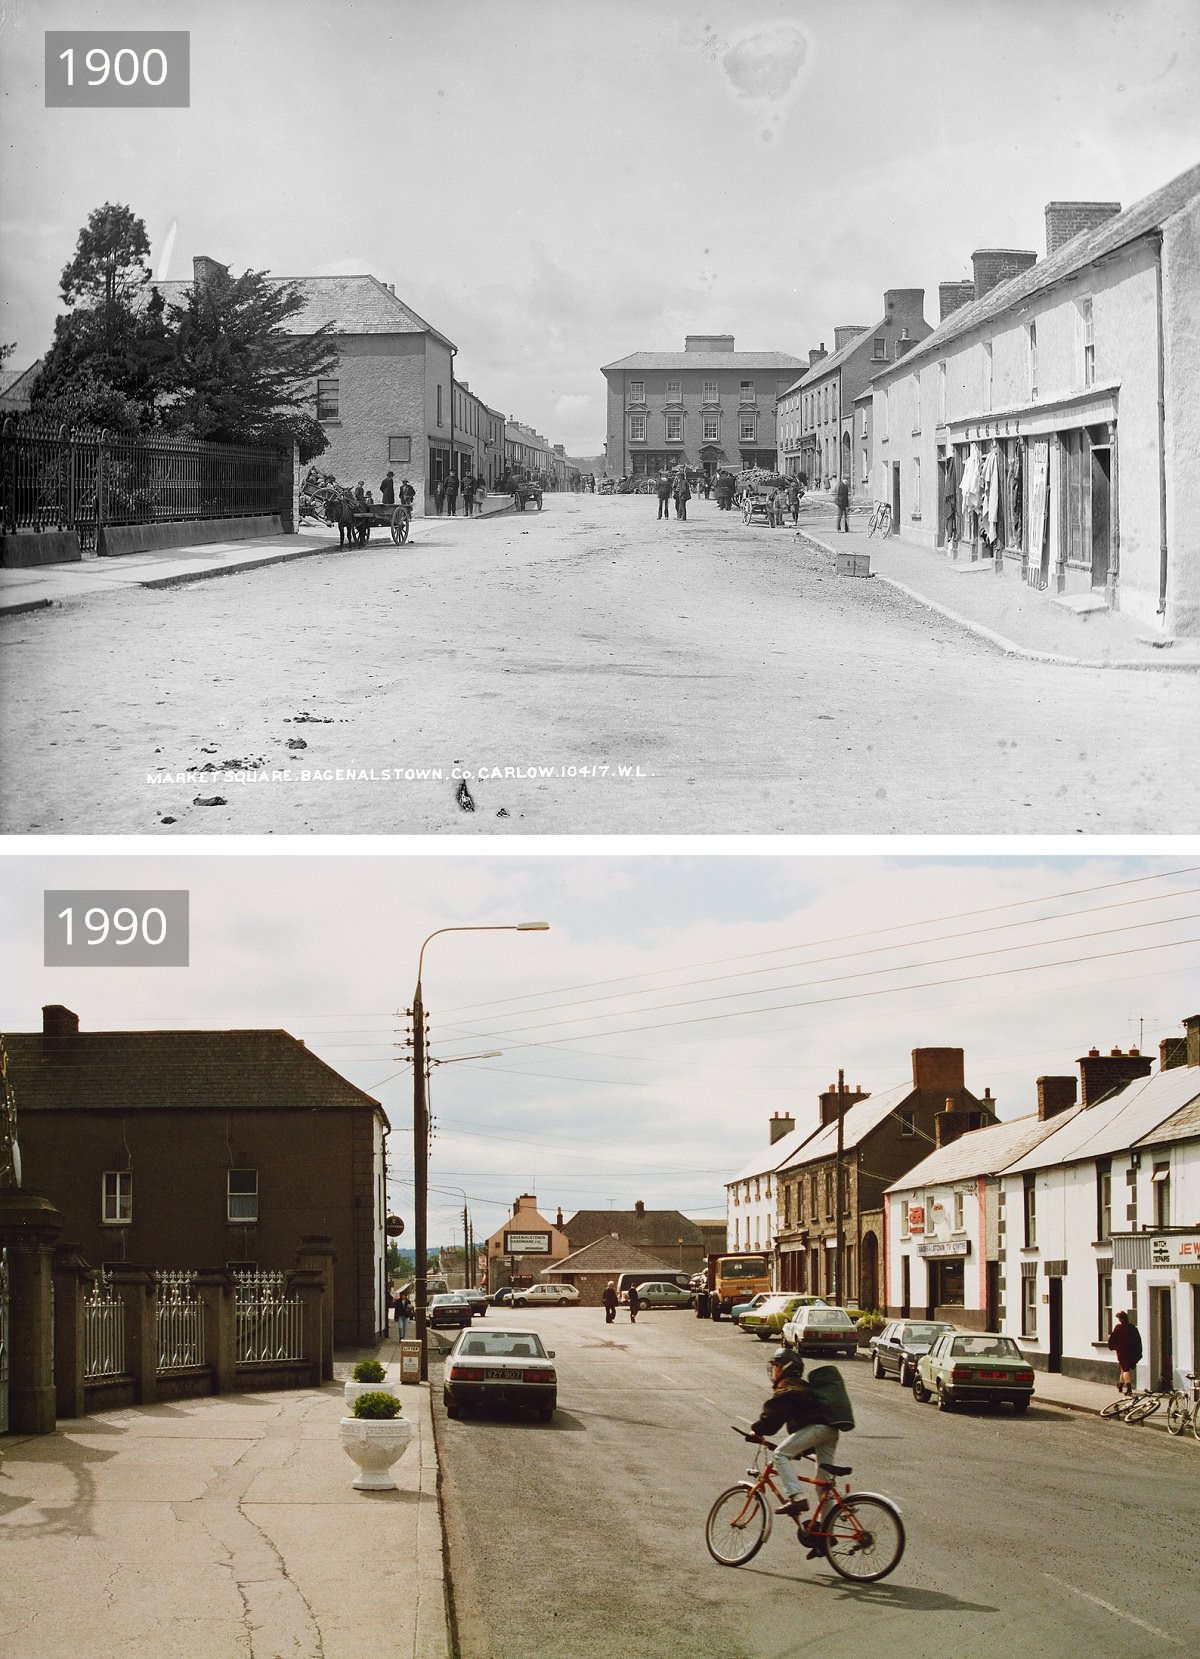 Market Square, Bagenalstown, Carlow, 1900-1991